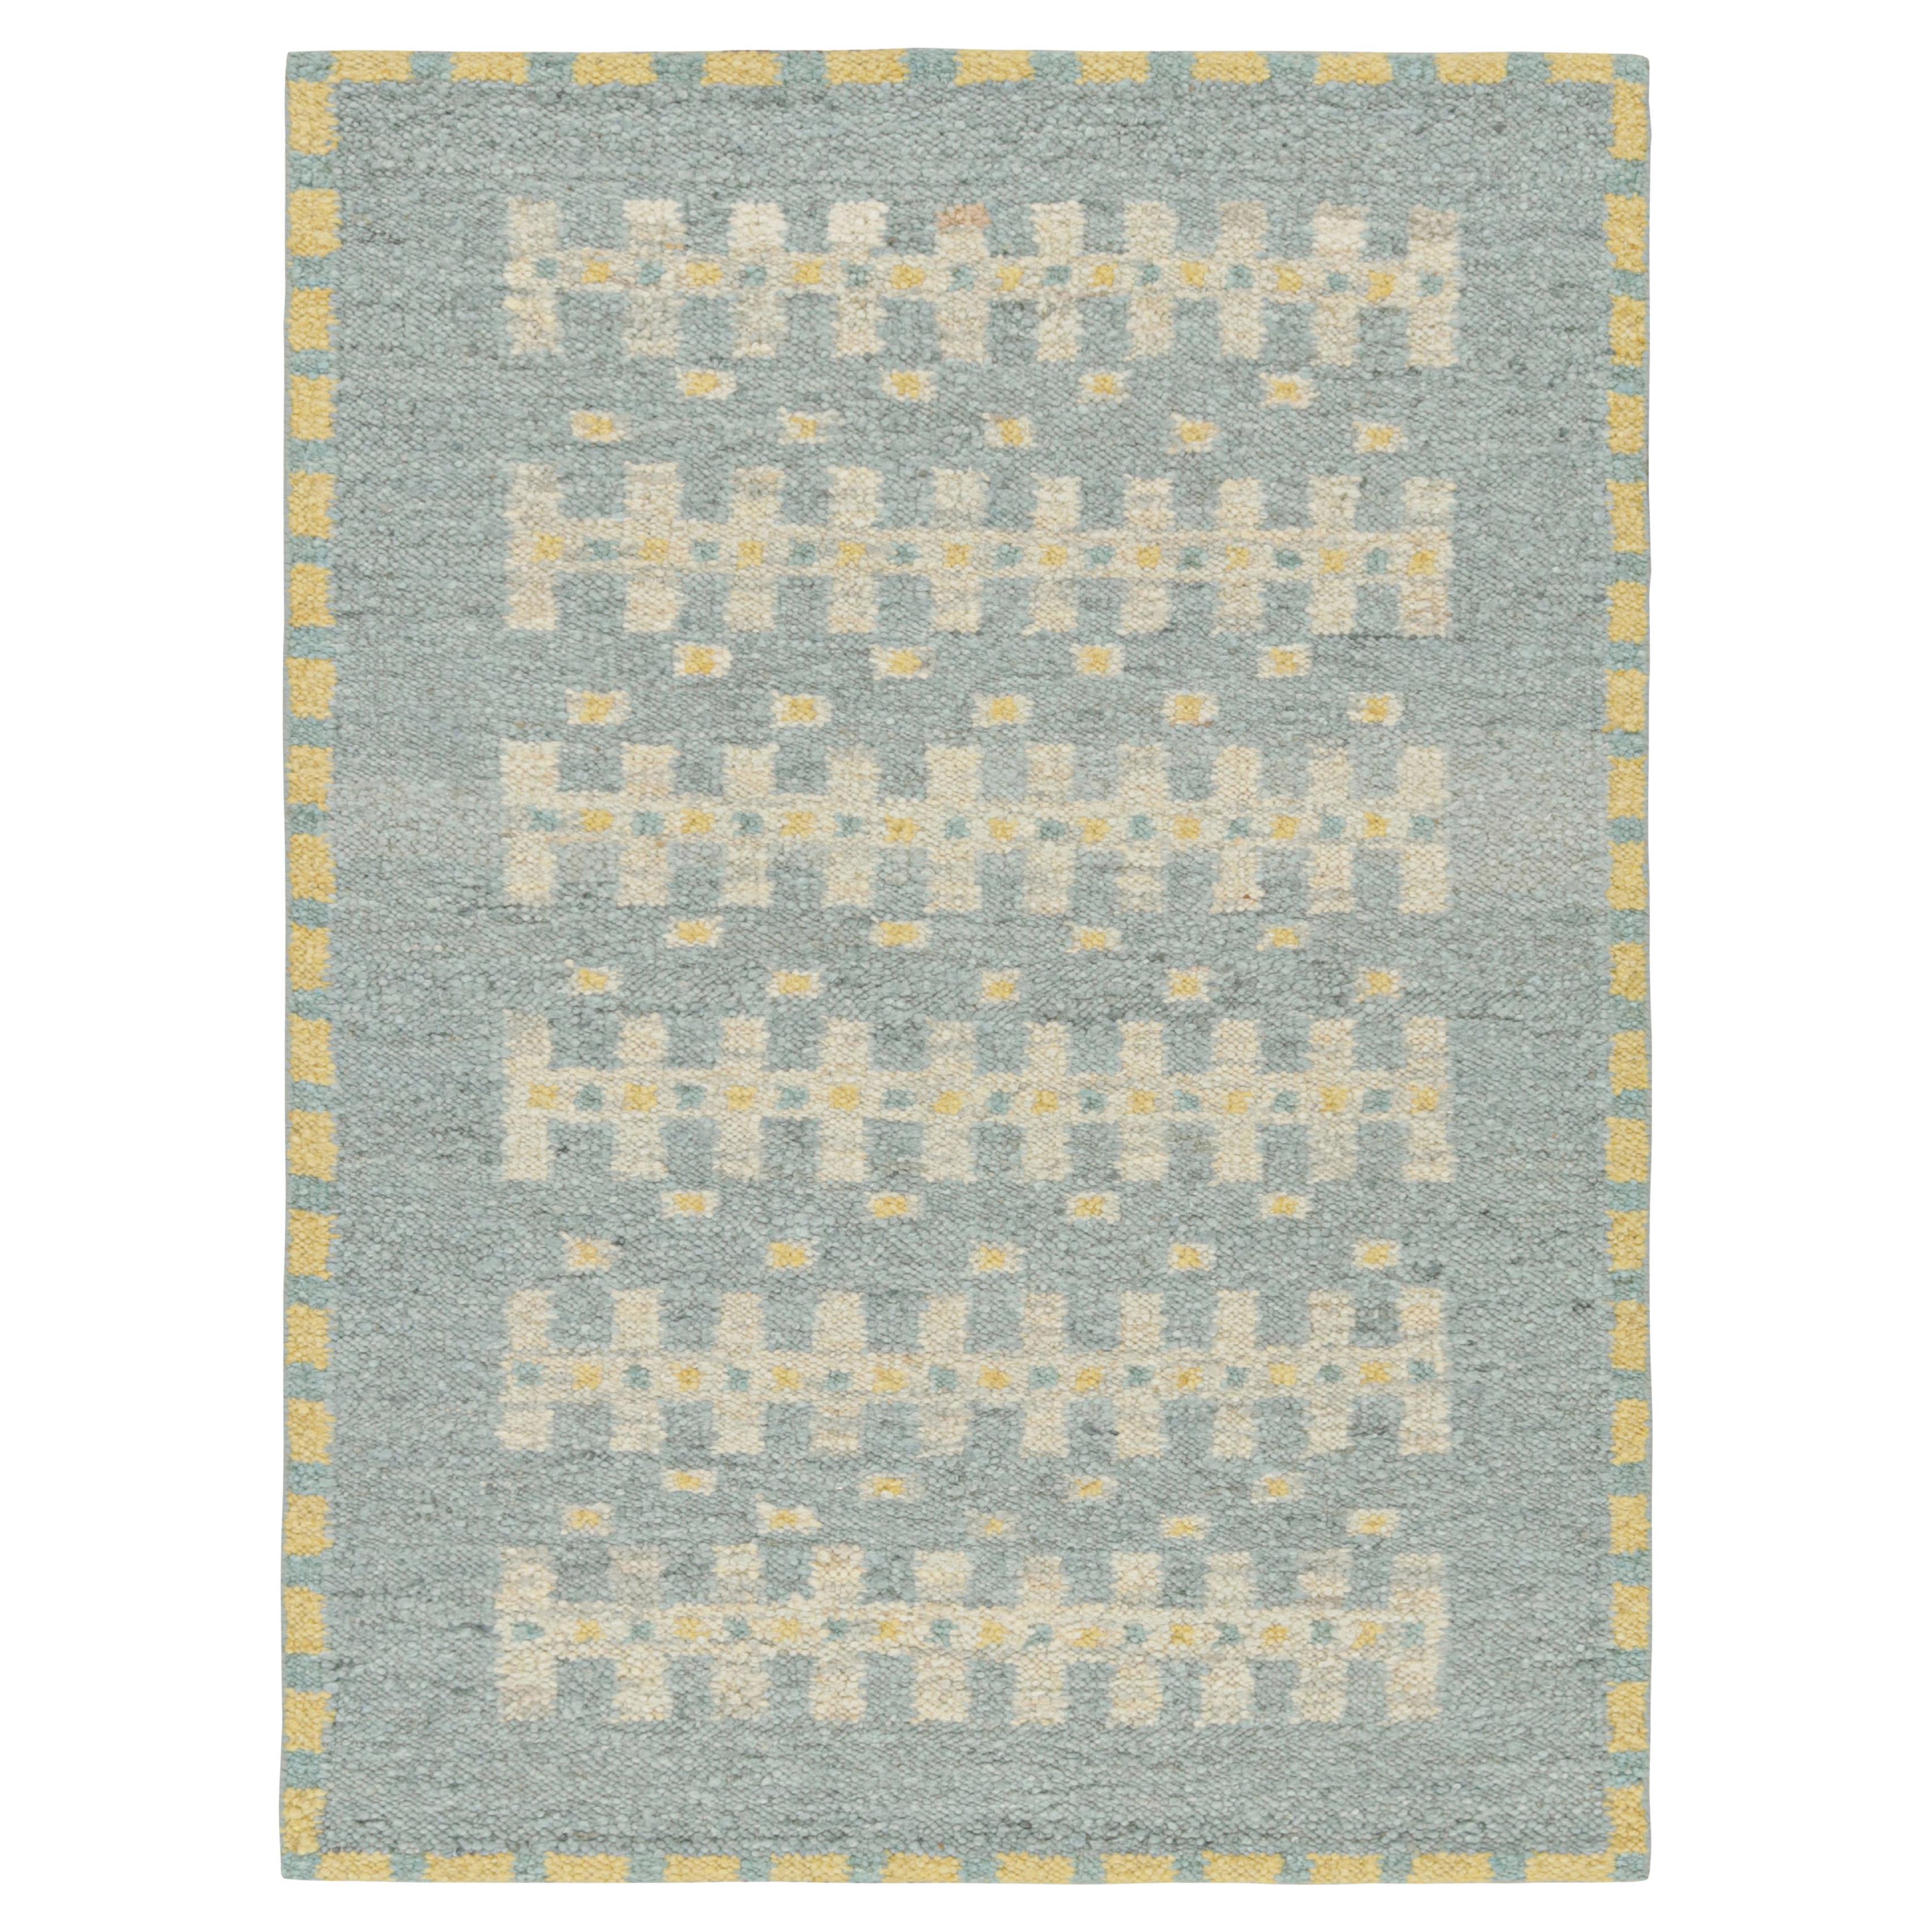 Rug & Kilim’s Scandinavian Style Rug in Blue with Cream Geometric Patterns